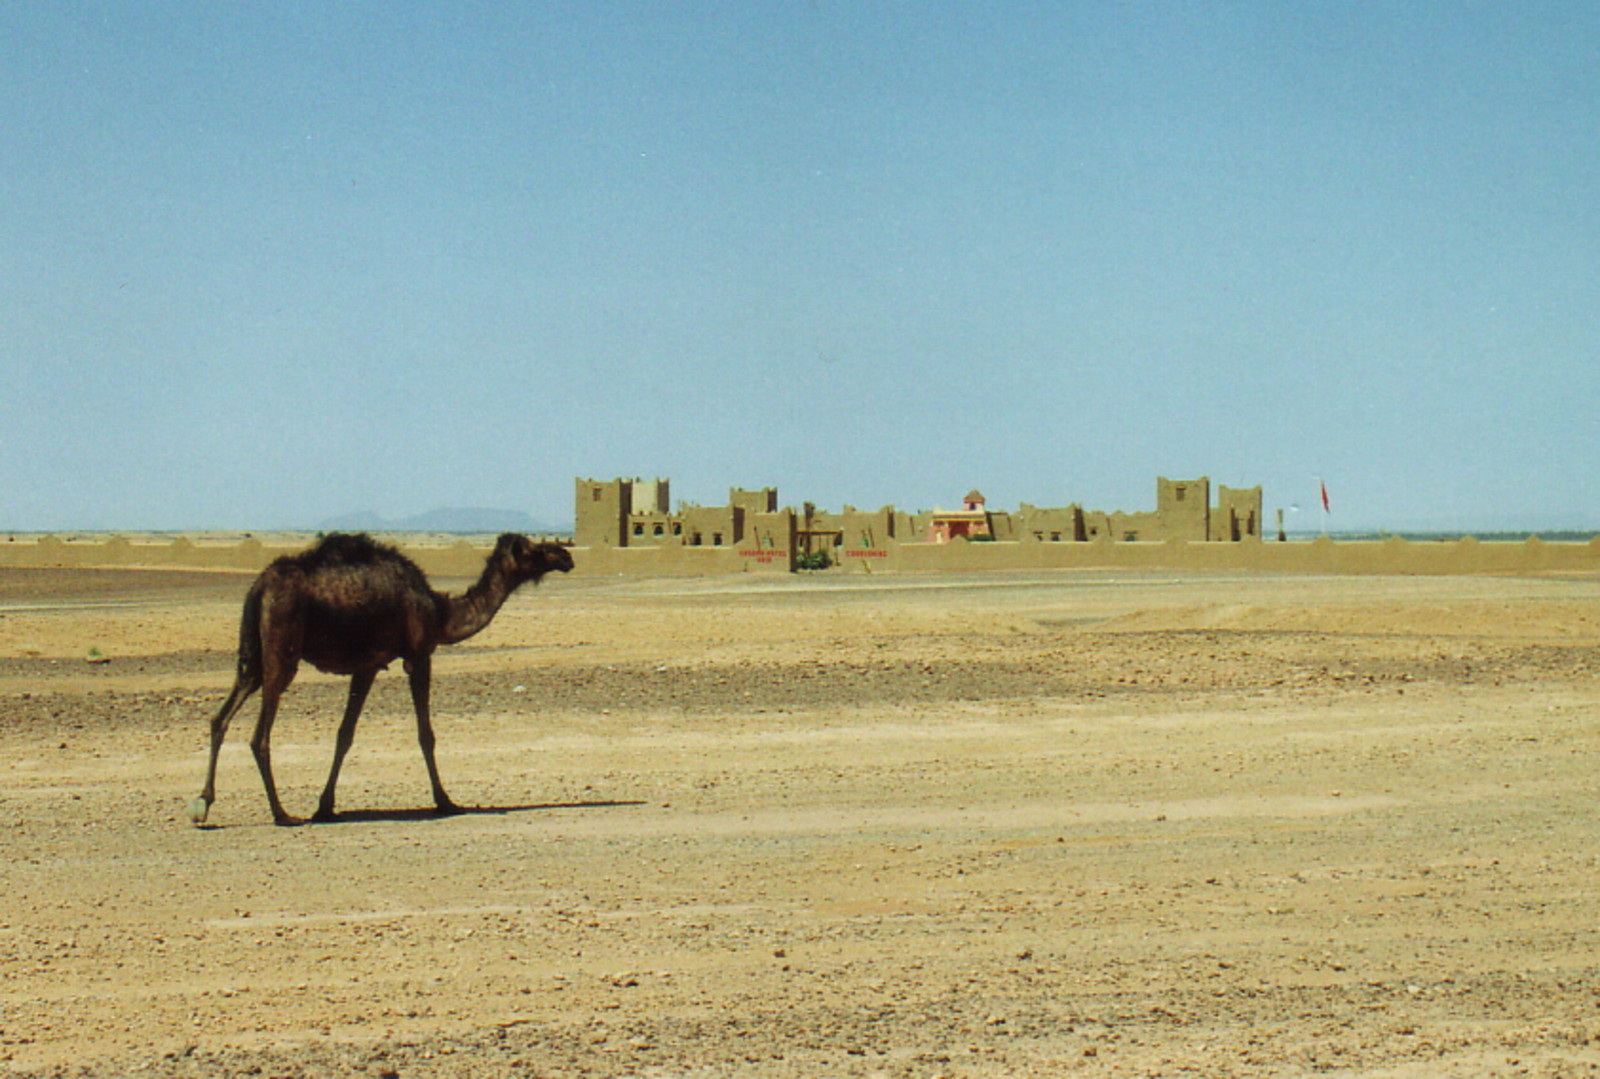 A camel and a mud building